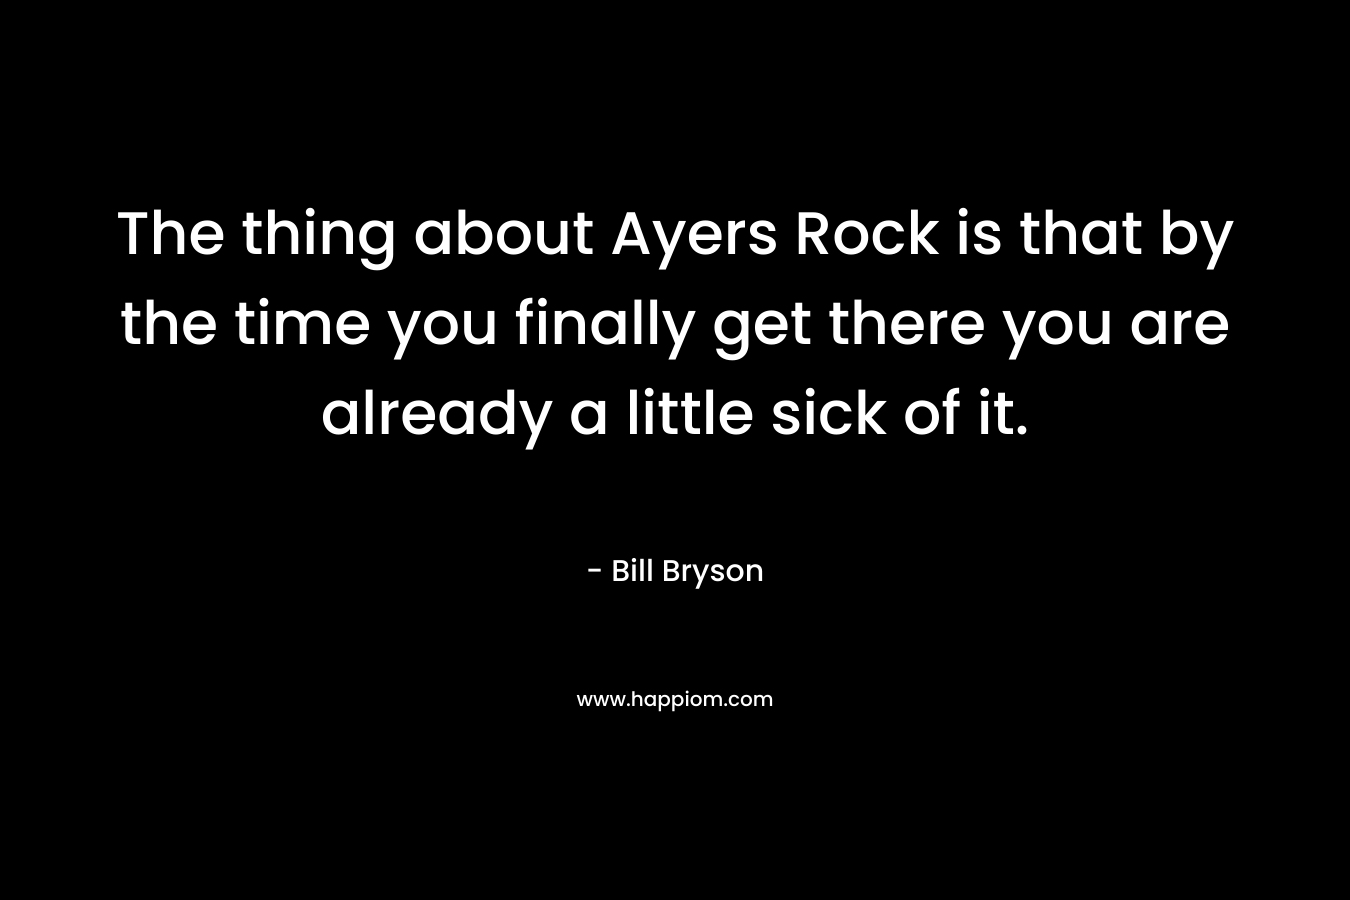 The thing about Ayers Rock is that by the time you finally get there you are already a little sick of it.